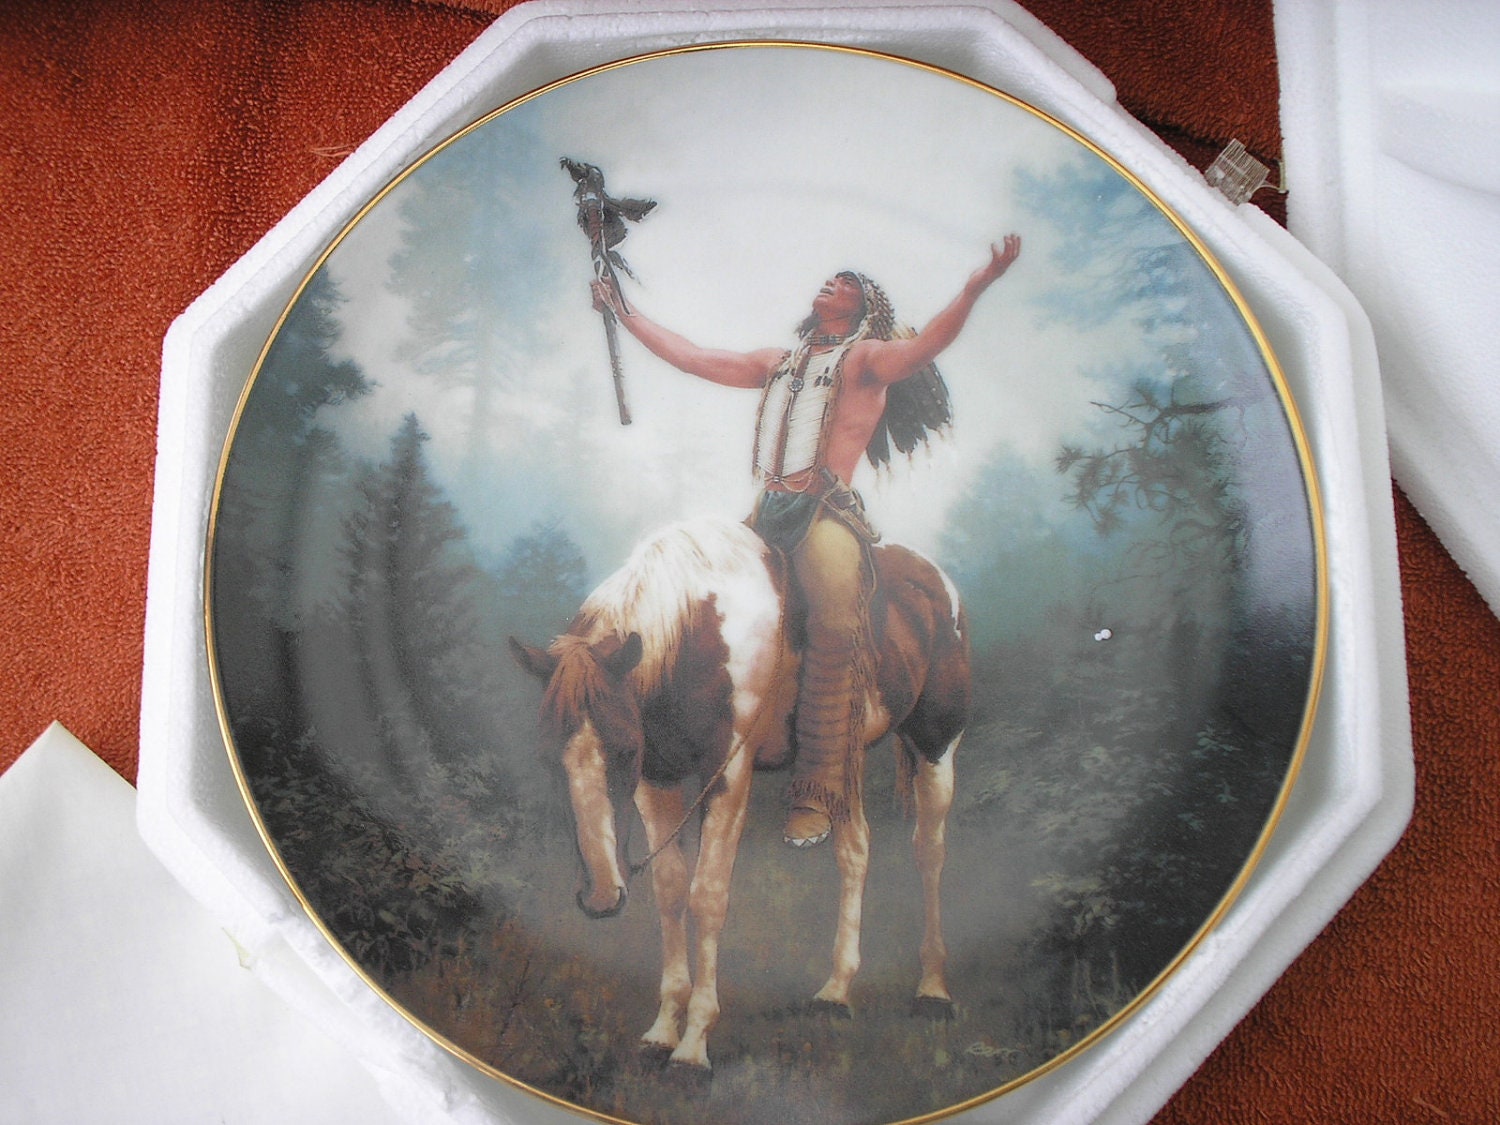 Hamilton collection plate Deliverance by jorgensonphylis on Etsy